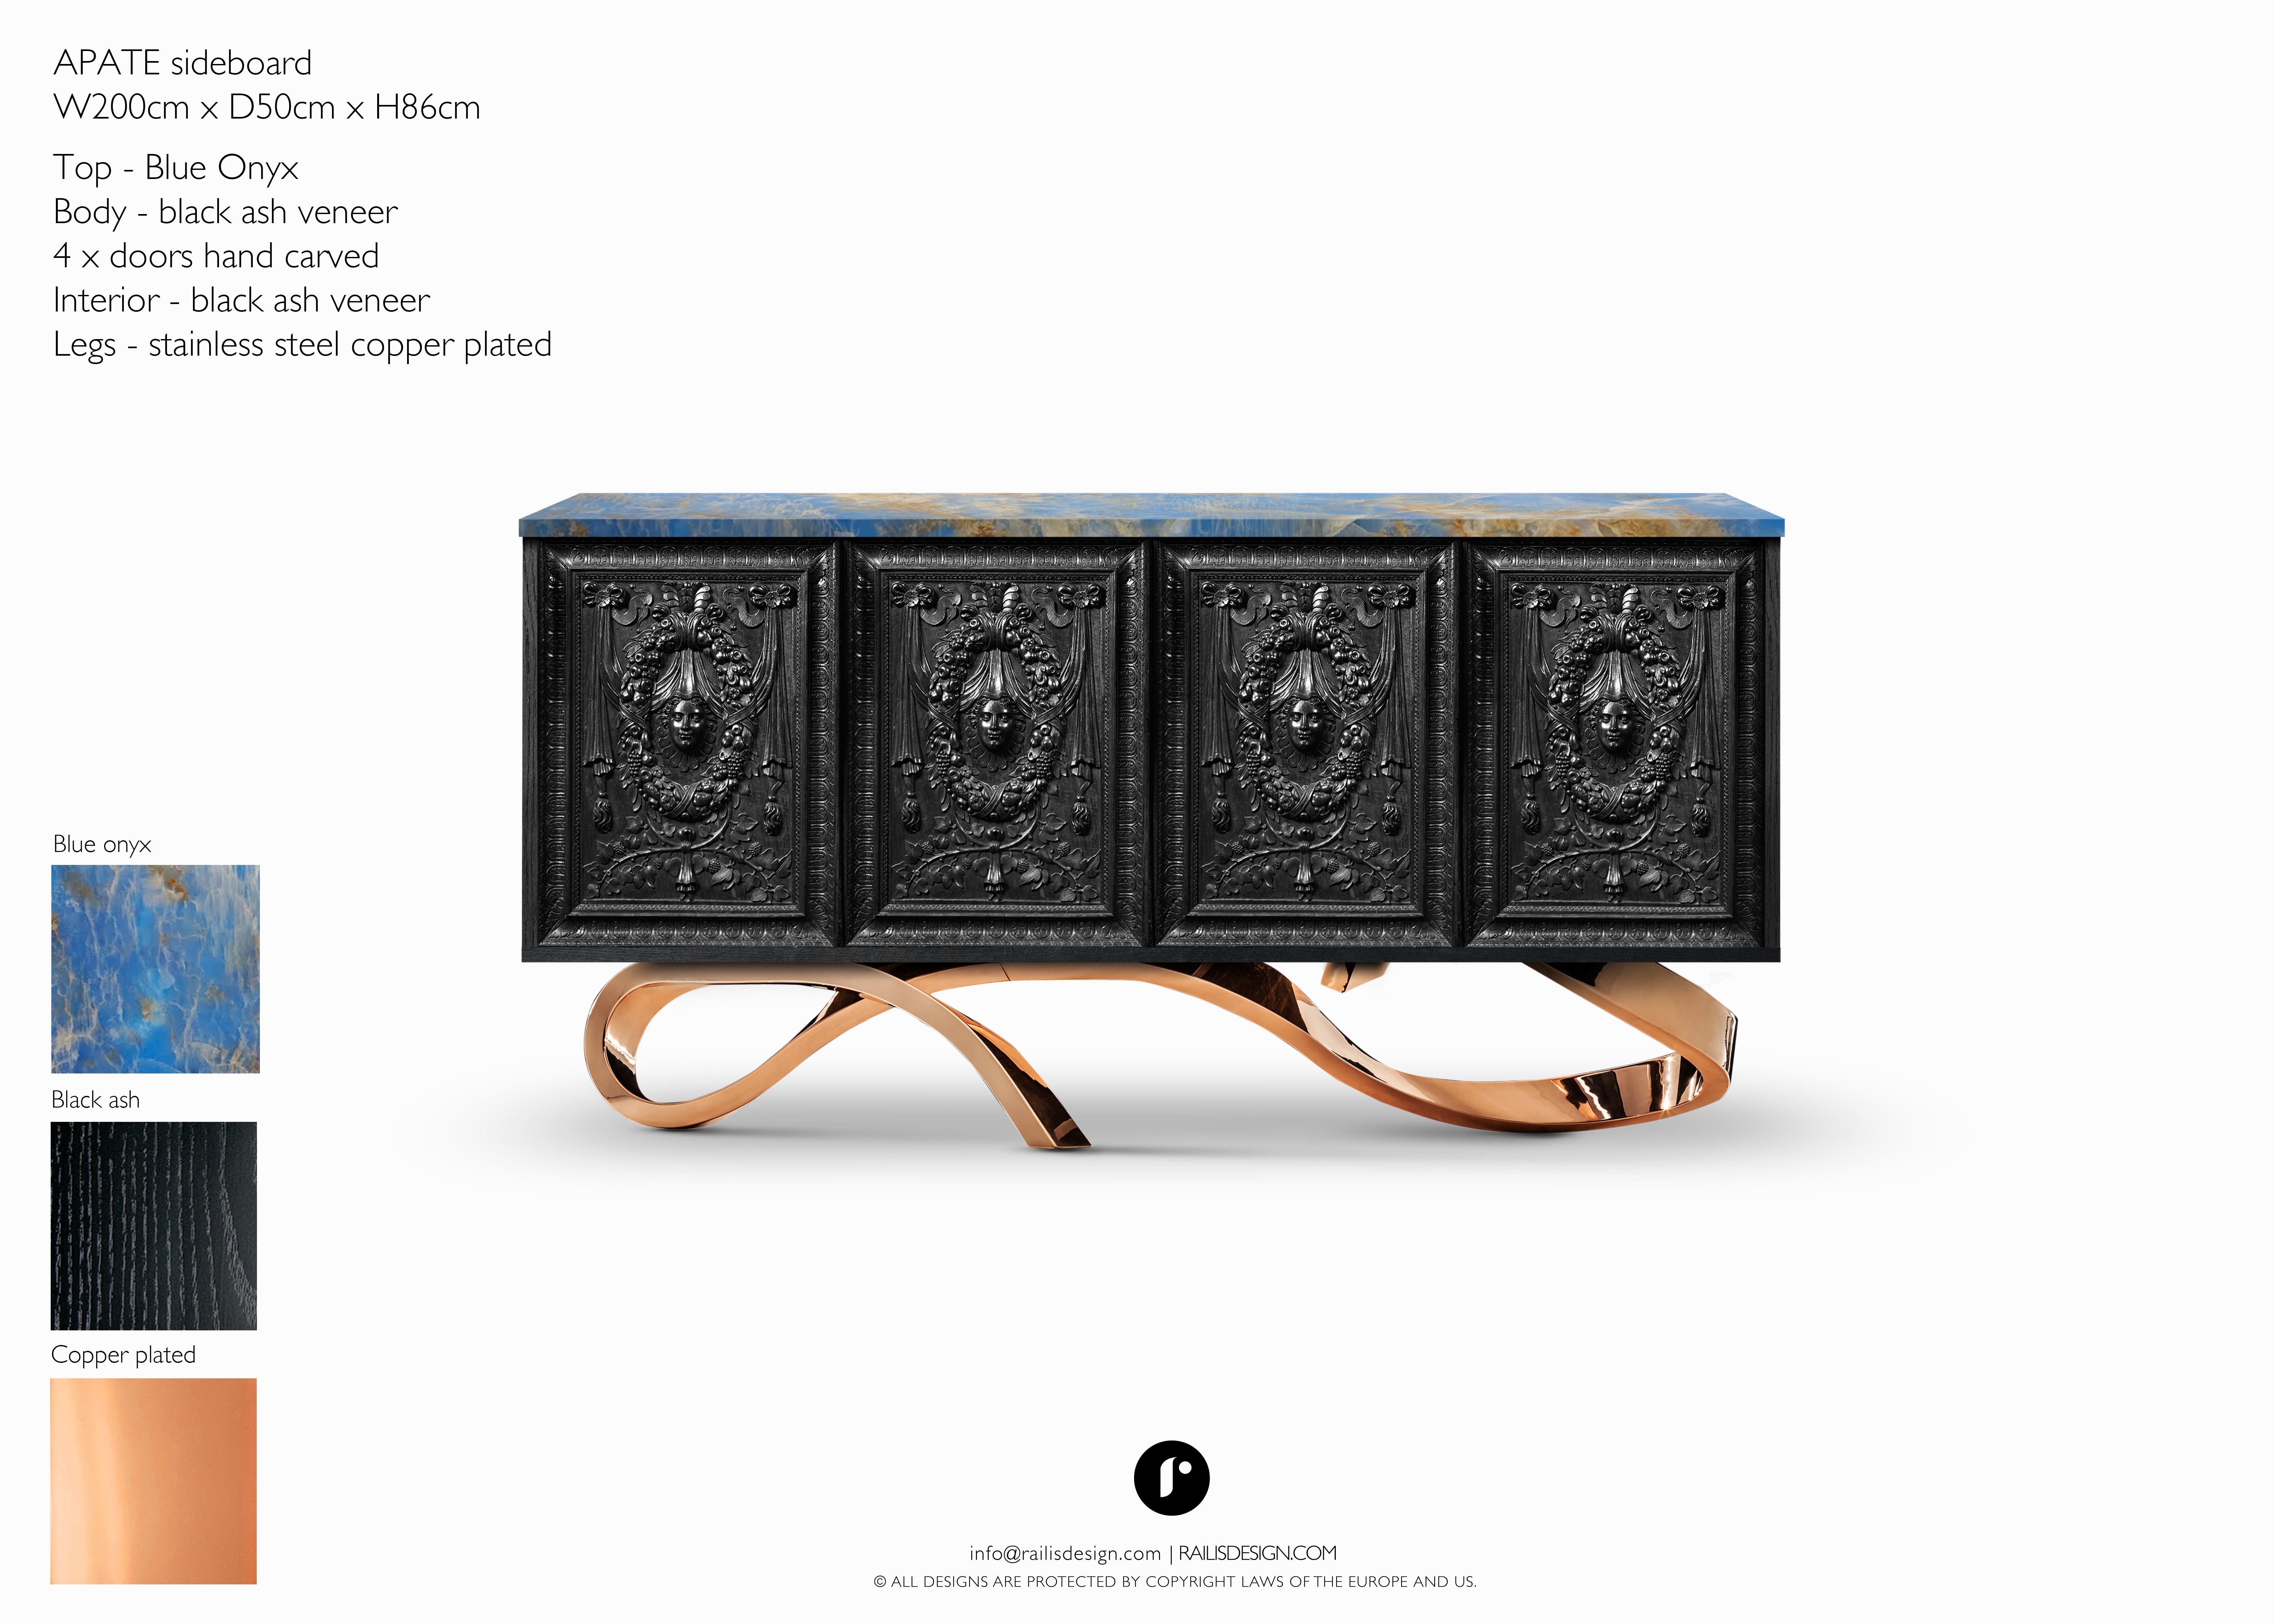 Sideboard Apate.

The Exclusive Apate Luxury Sideboard, the perfect union of materials, a harmony of forms. A luxurious seductive piece, handcrafted by Railis Design craftsmen with superb attention to detail. This unique sideboard offers exceptional